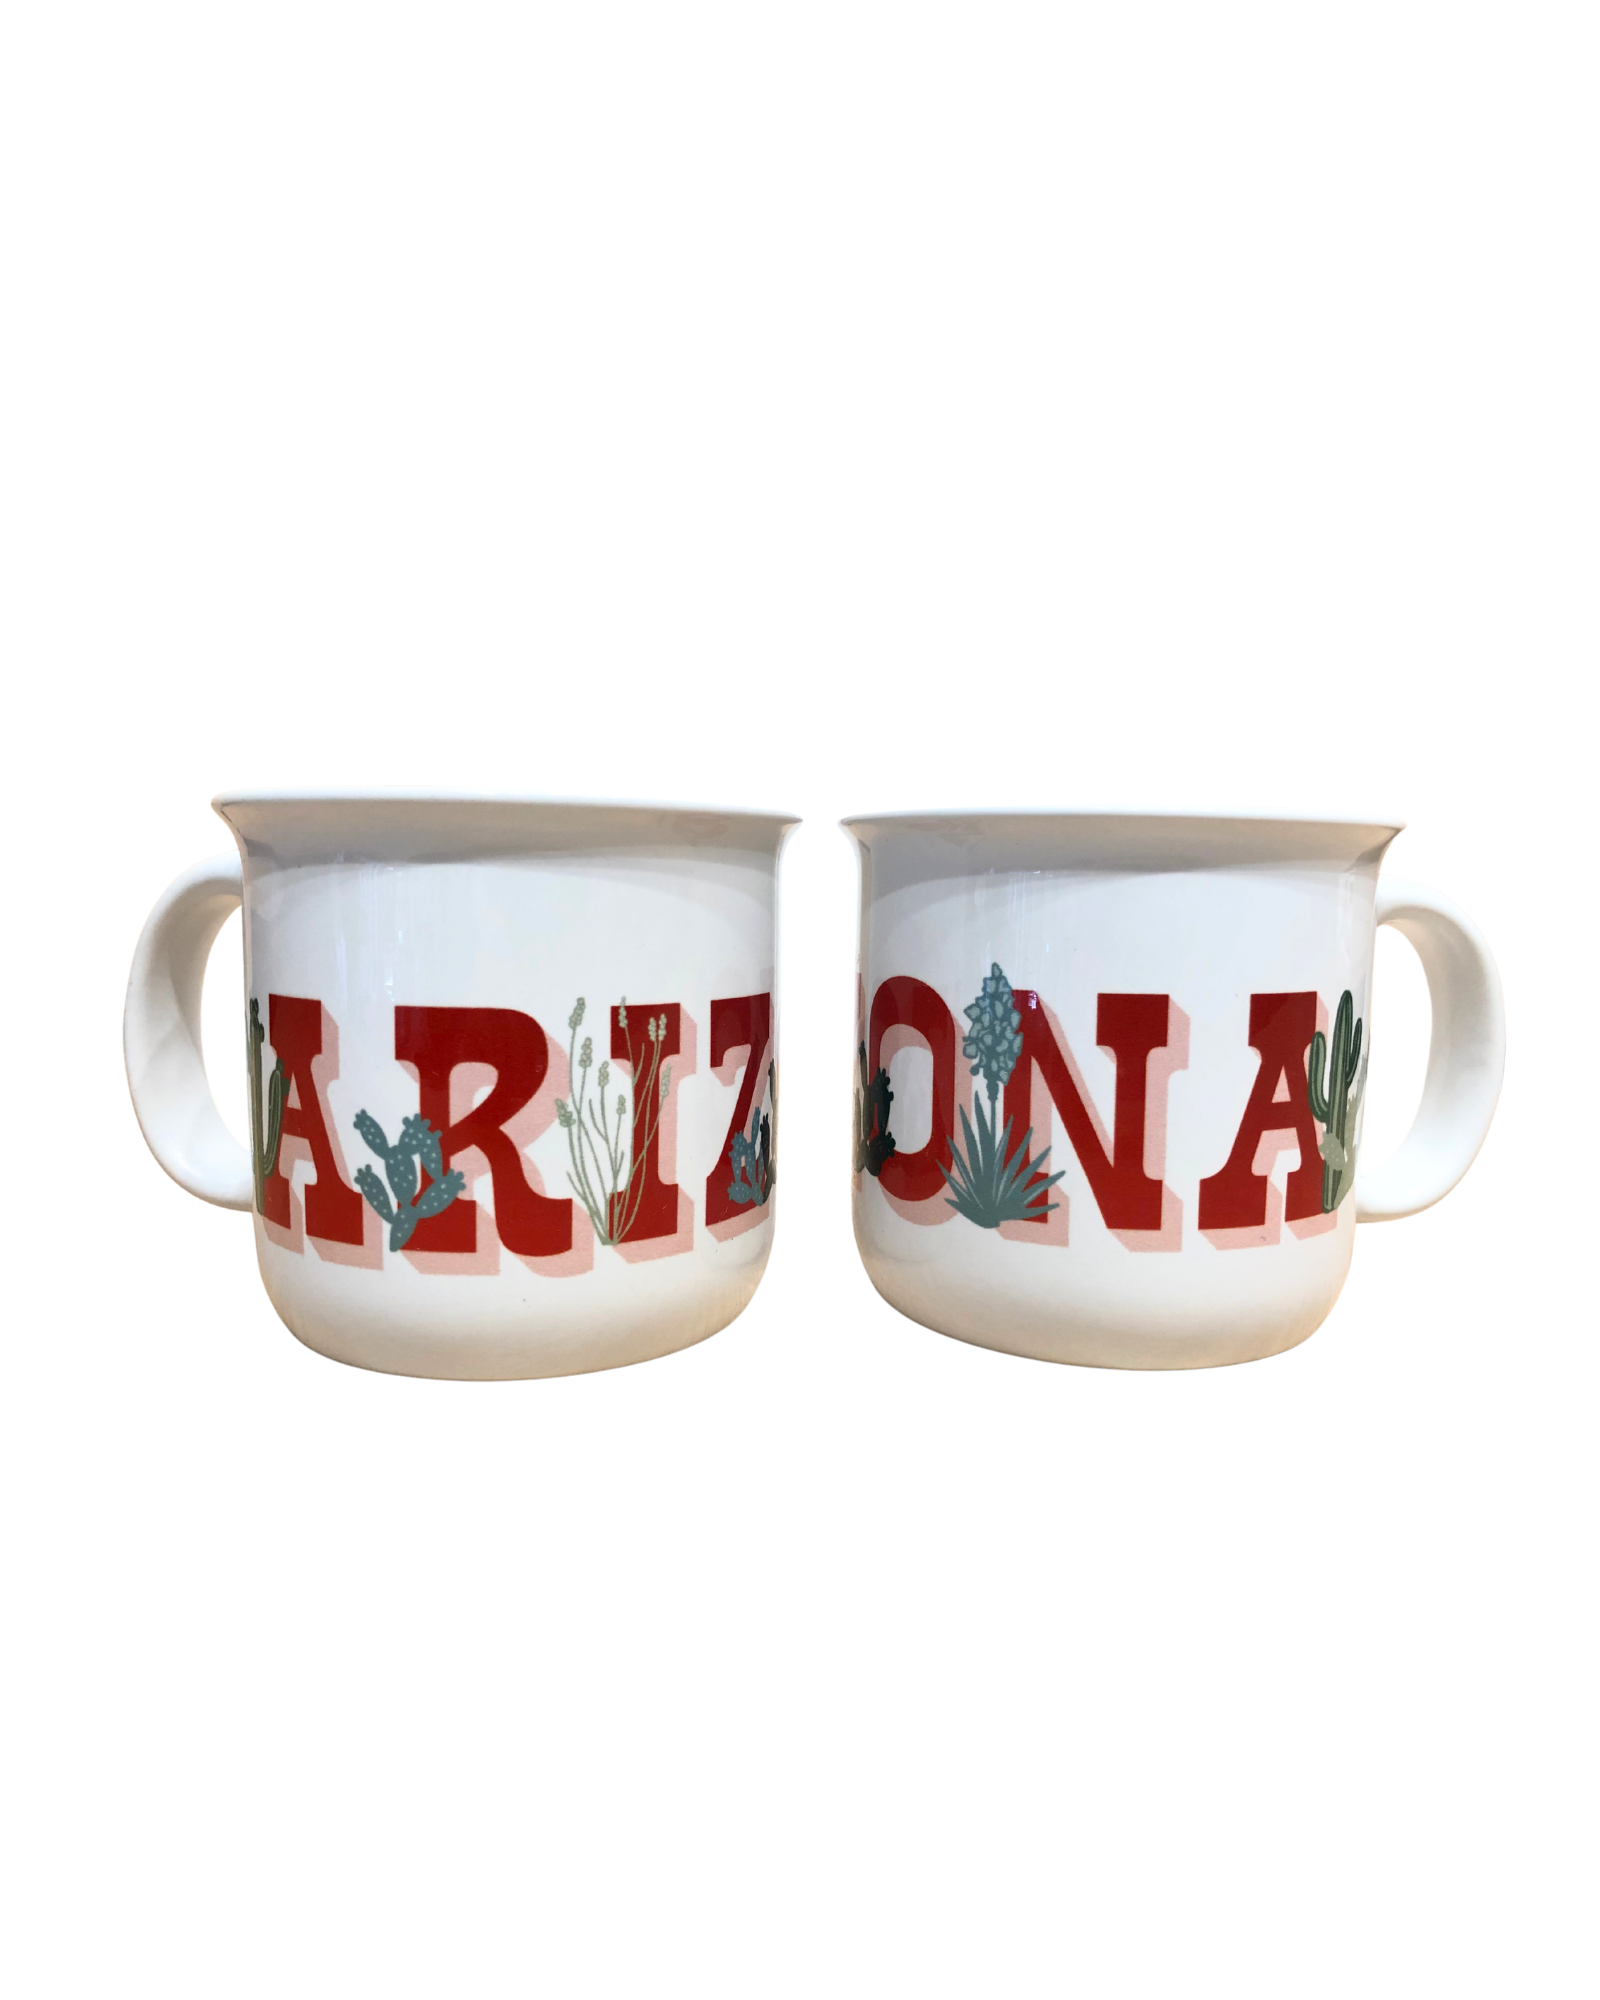 White mug with red text reading "Arizona" with desert plants in front of the letters